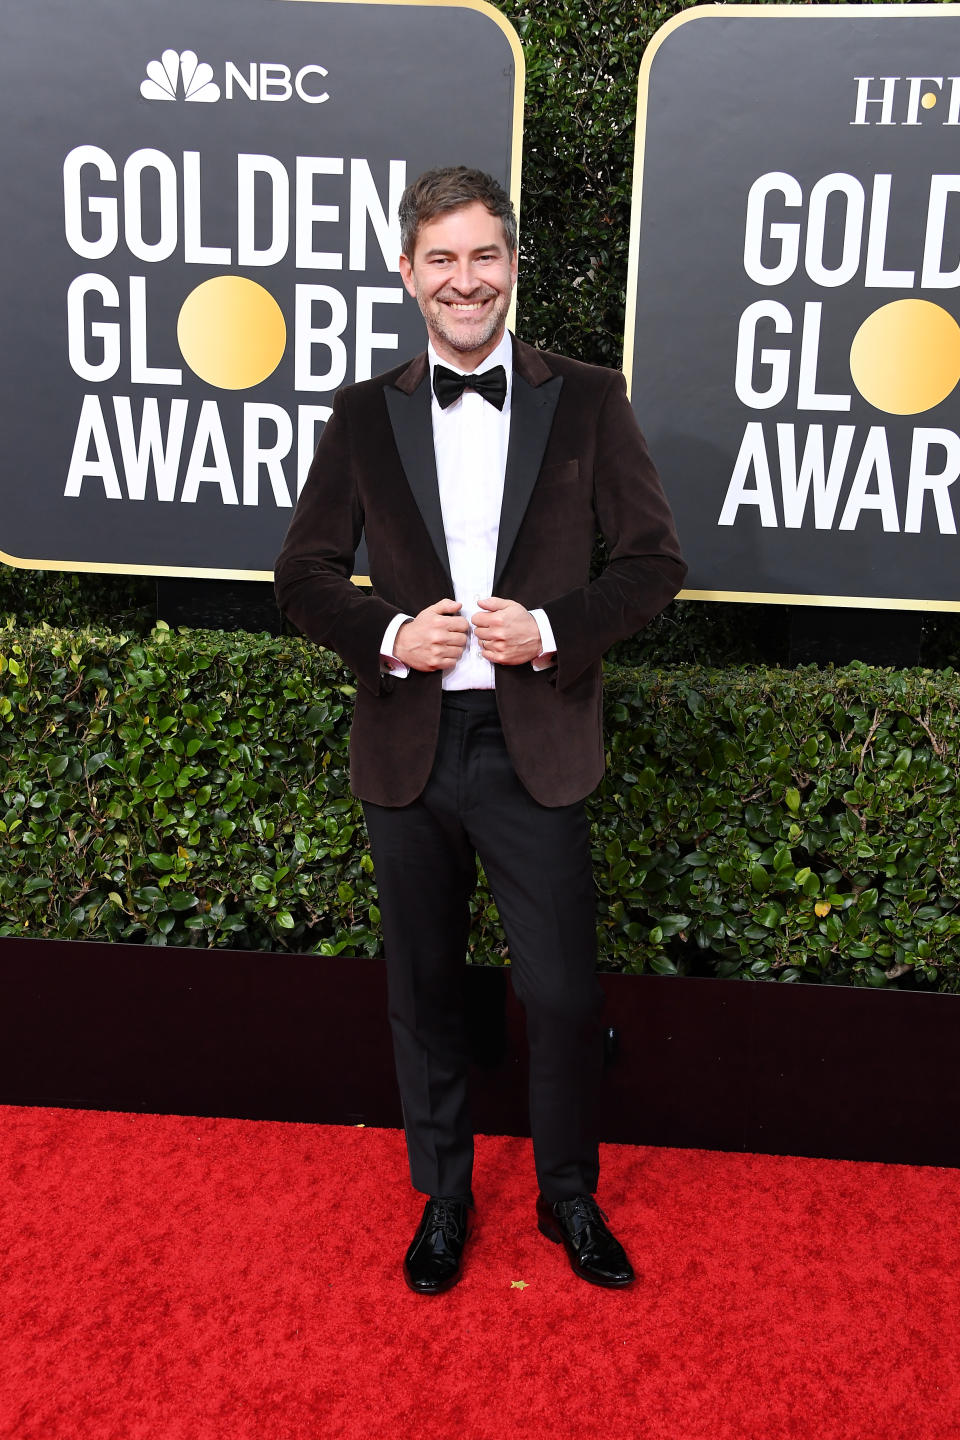 BEVERLY HILLS, CALIFORNIA - JANUARY 05: Mark Duplass attends the 77th Annual Golden Globe Awards at The Beverly Hilton Hotel on January 05, 2020 in Beverly Hills, California. (Photo by Steve Granitz/WireImage)